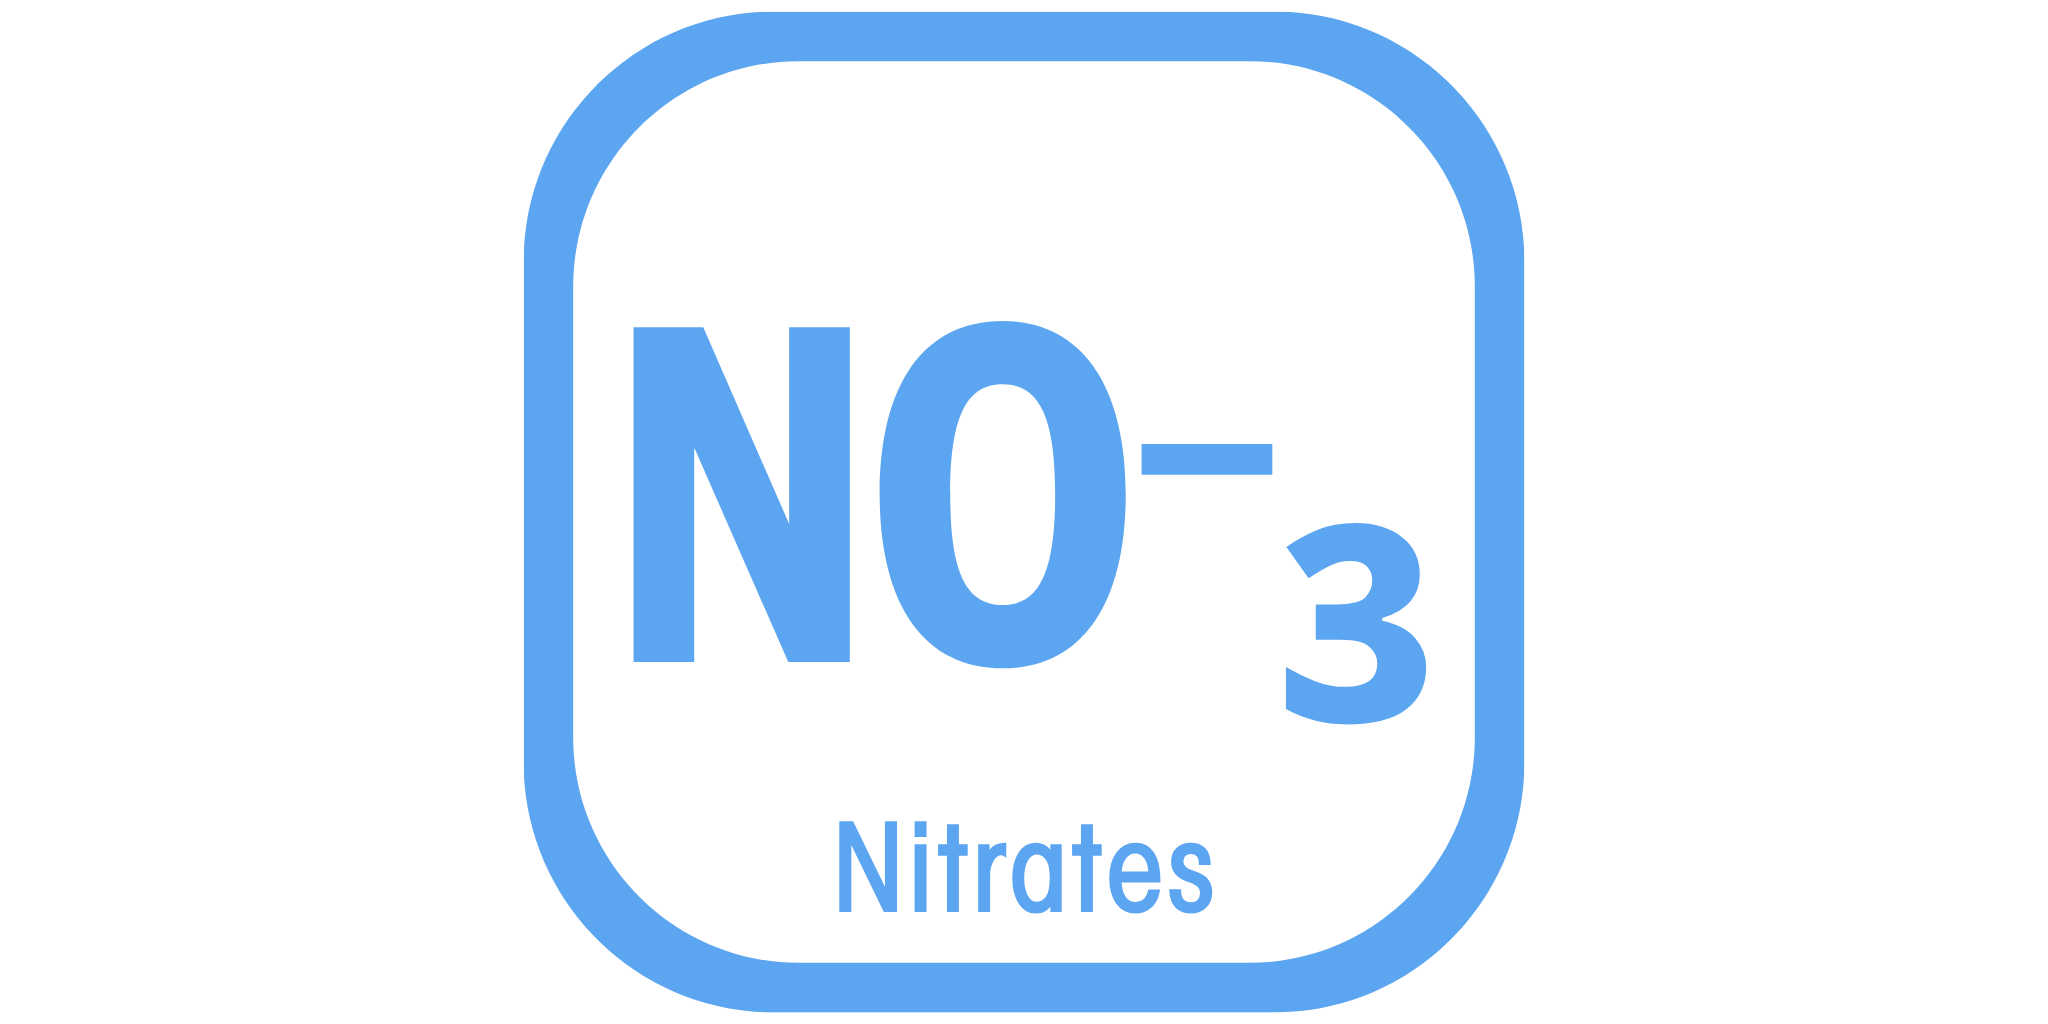 A visual representation of the nitrate ion (NO₃⁻), a common contaminant in groundwater